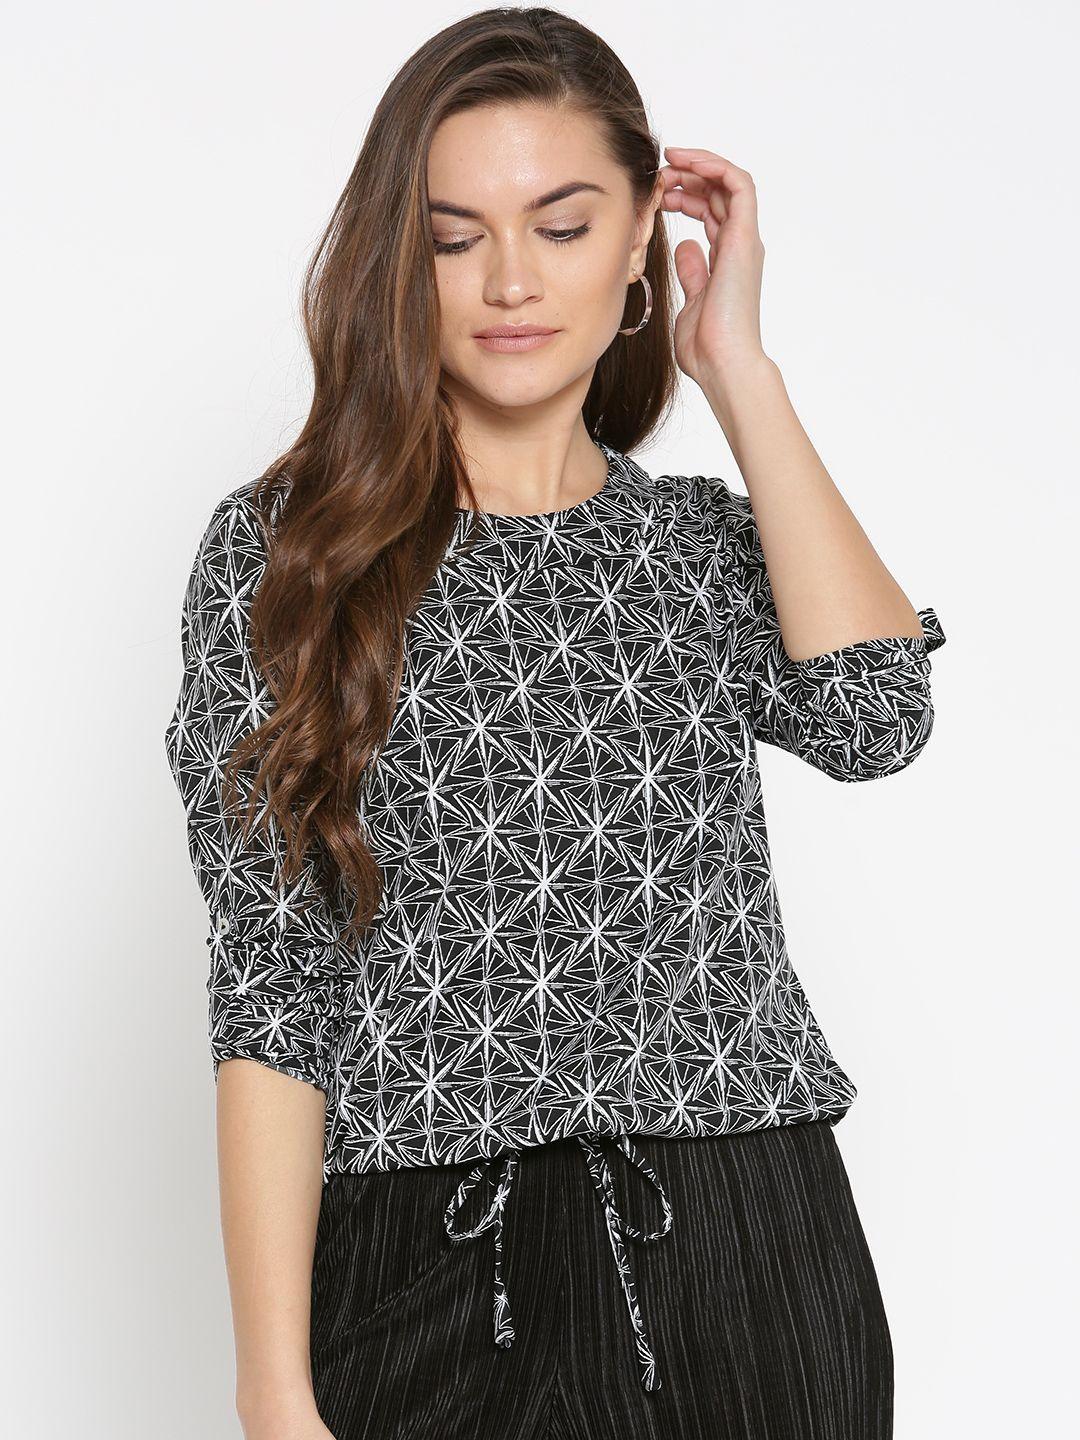 style-quotient-women-black-&-white-printed-top